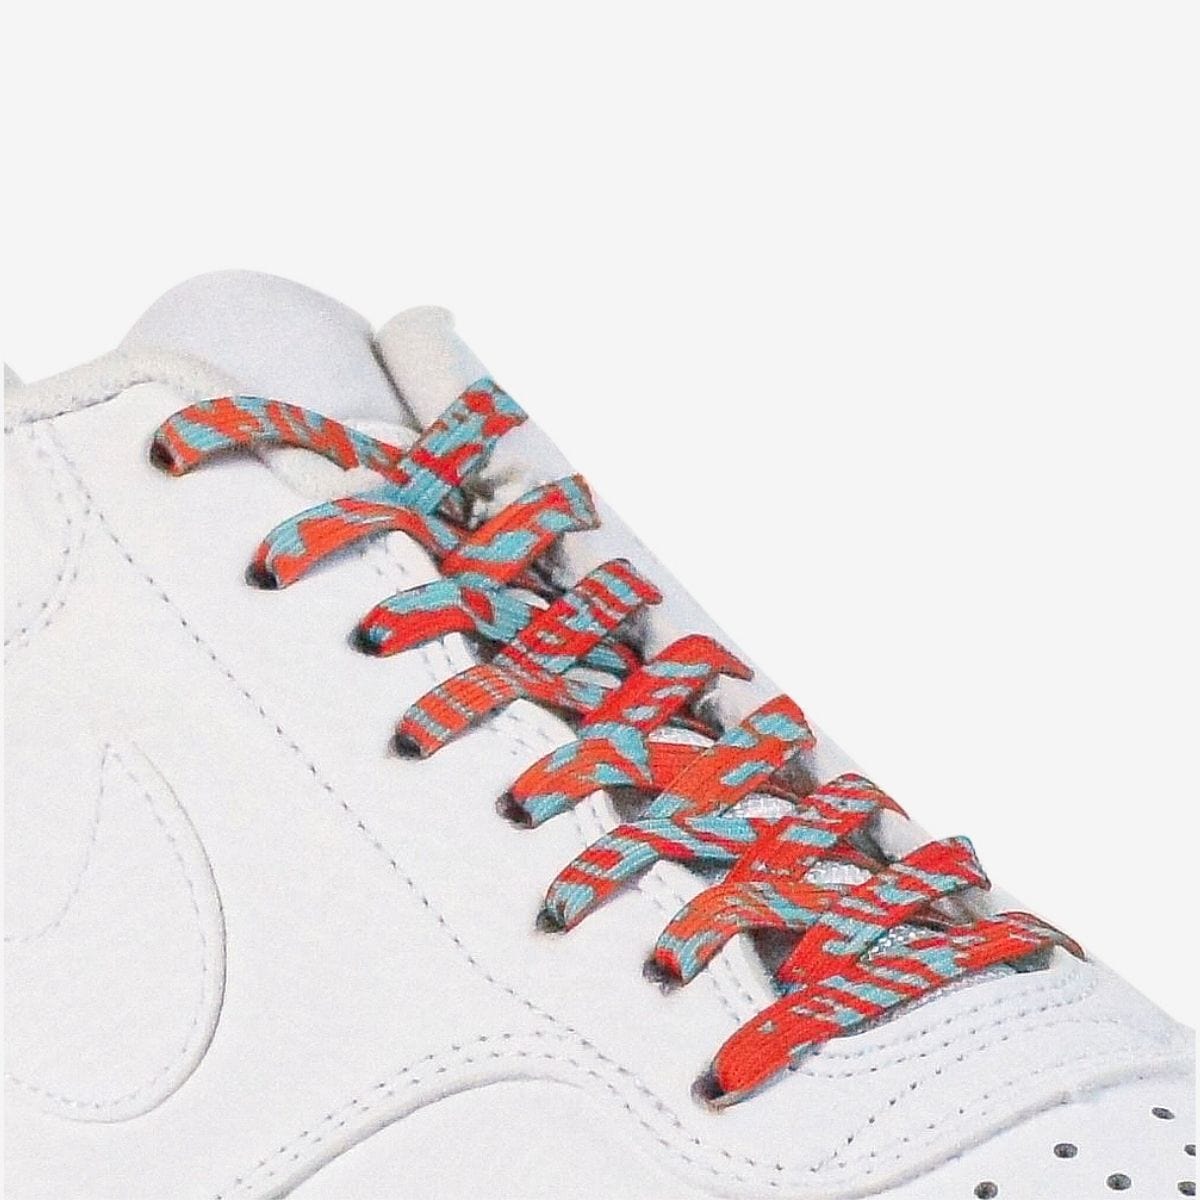 different-ways-to-lace-shoes-with-red-camo-elastic-shoelaces-on-white-kicks